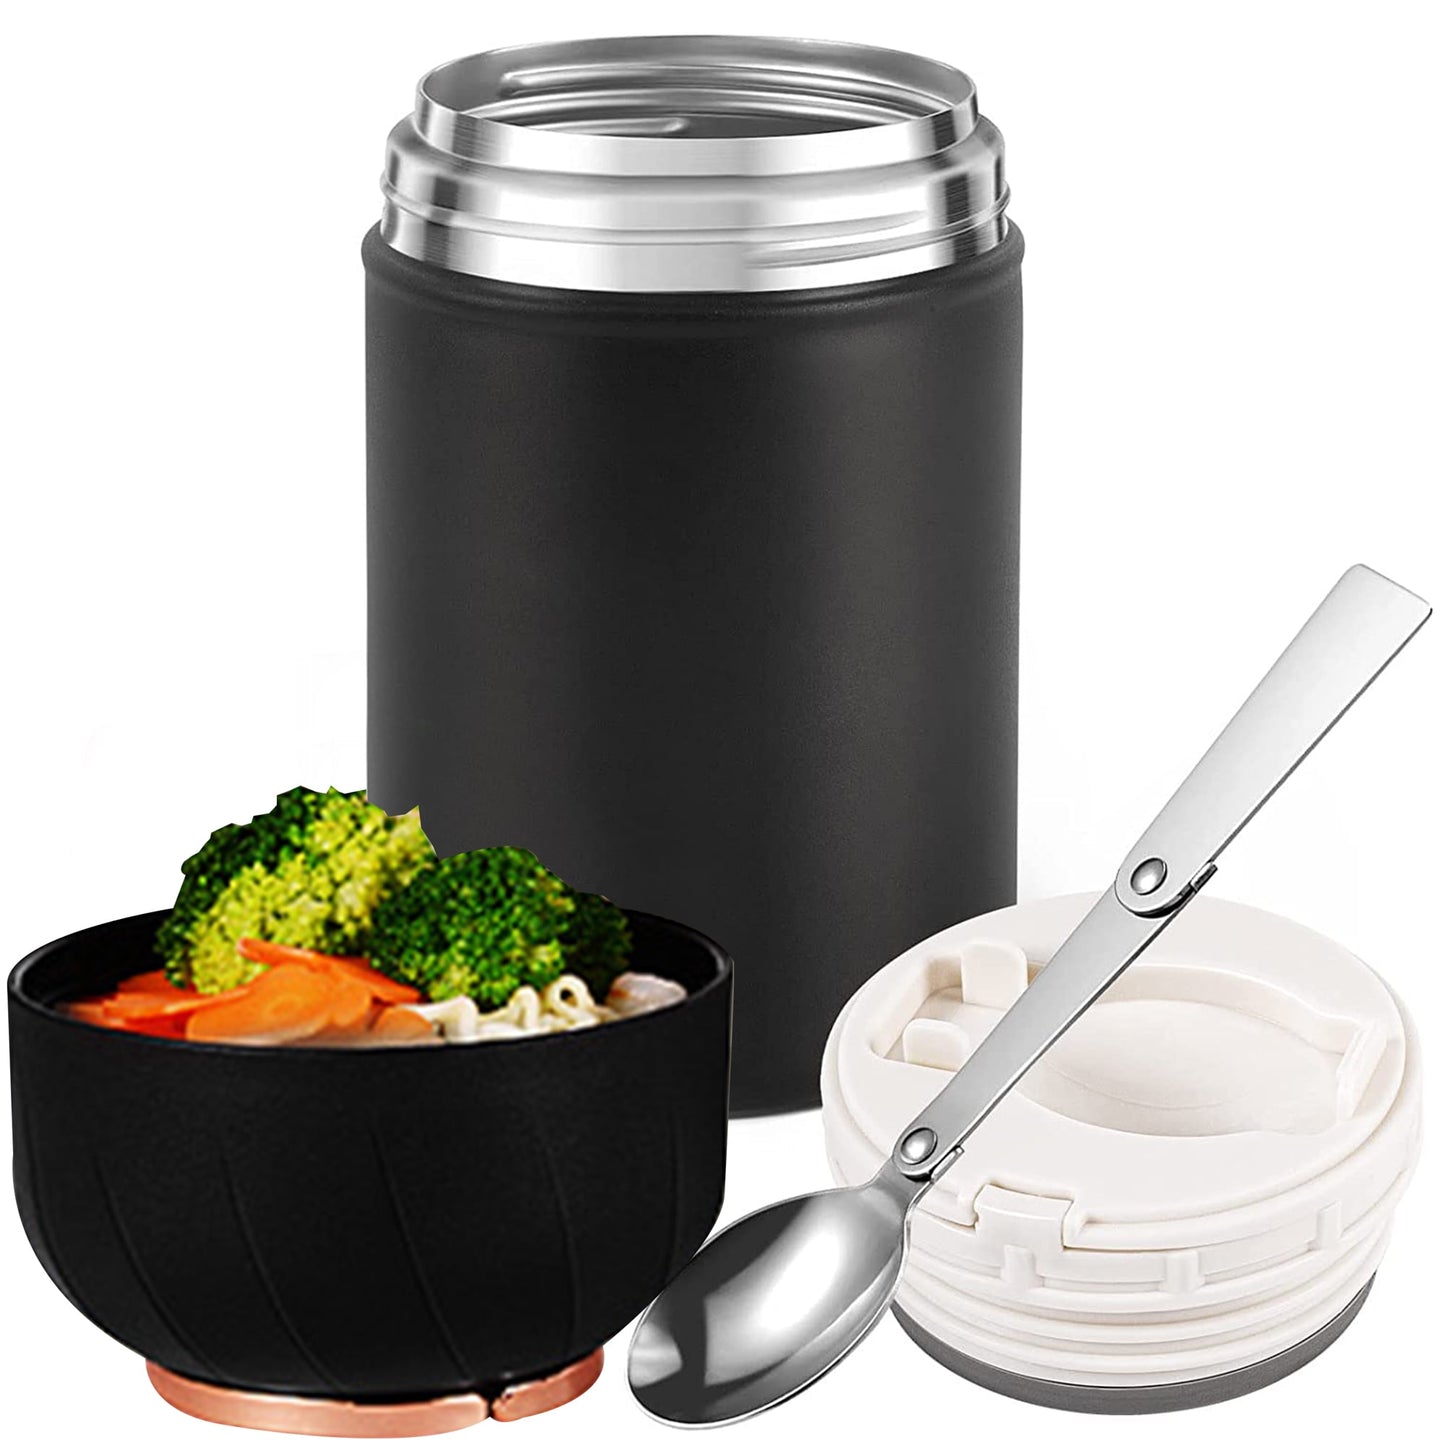 Insulated Food Flask, 600ML Insulated Food Jar with Folding Spoon, Stainless Steel Lunch Food Container Flask for Hot and Cold Food, Lunch Box for School Office Picnic Travel Outdoors Black